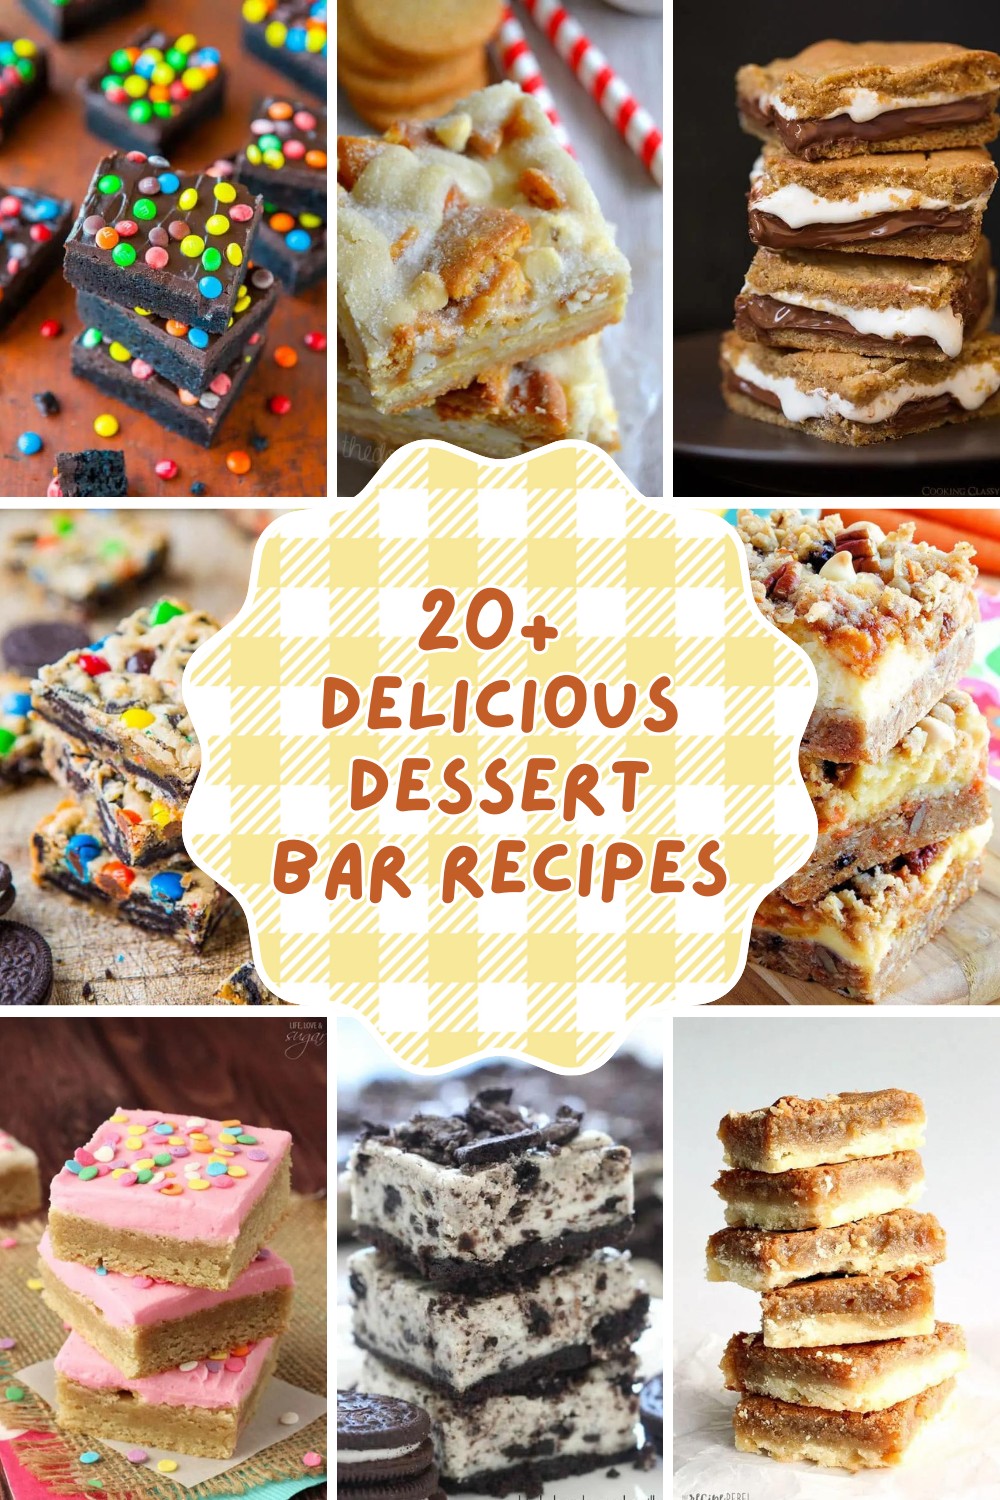 Get ready to indulge with these heavenly dessert bar recipes! Perfect for satisfying your cravings, these bars range from rich and chocolatey to light and fruity. Save this pin for your next baking spree! #DessertTime #YummyRecipes

